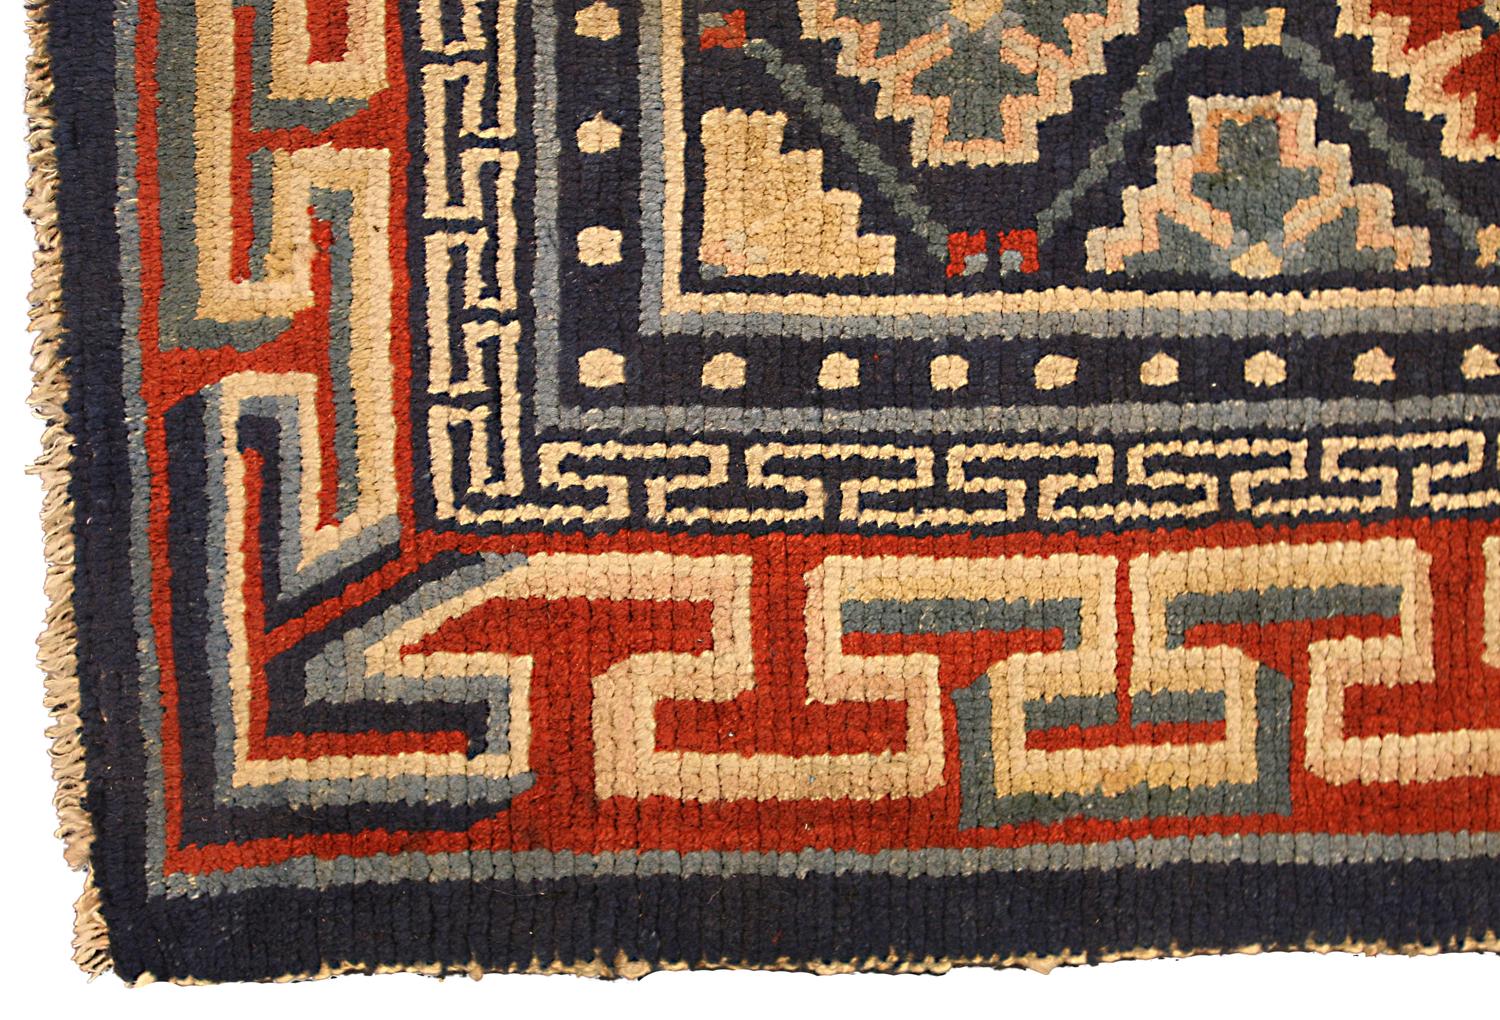 This is an antique Tibetan mat rug woven during the first quarter of the 20th-century circle 1920 and measures 80 x 66CM in size. its field is made using a lattice design accompanied with repeating abstract snowflake motifs set on a dark blue